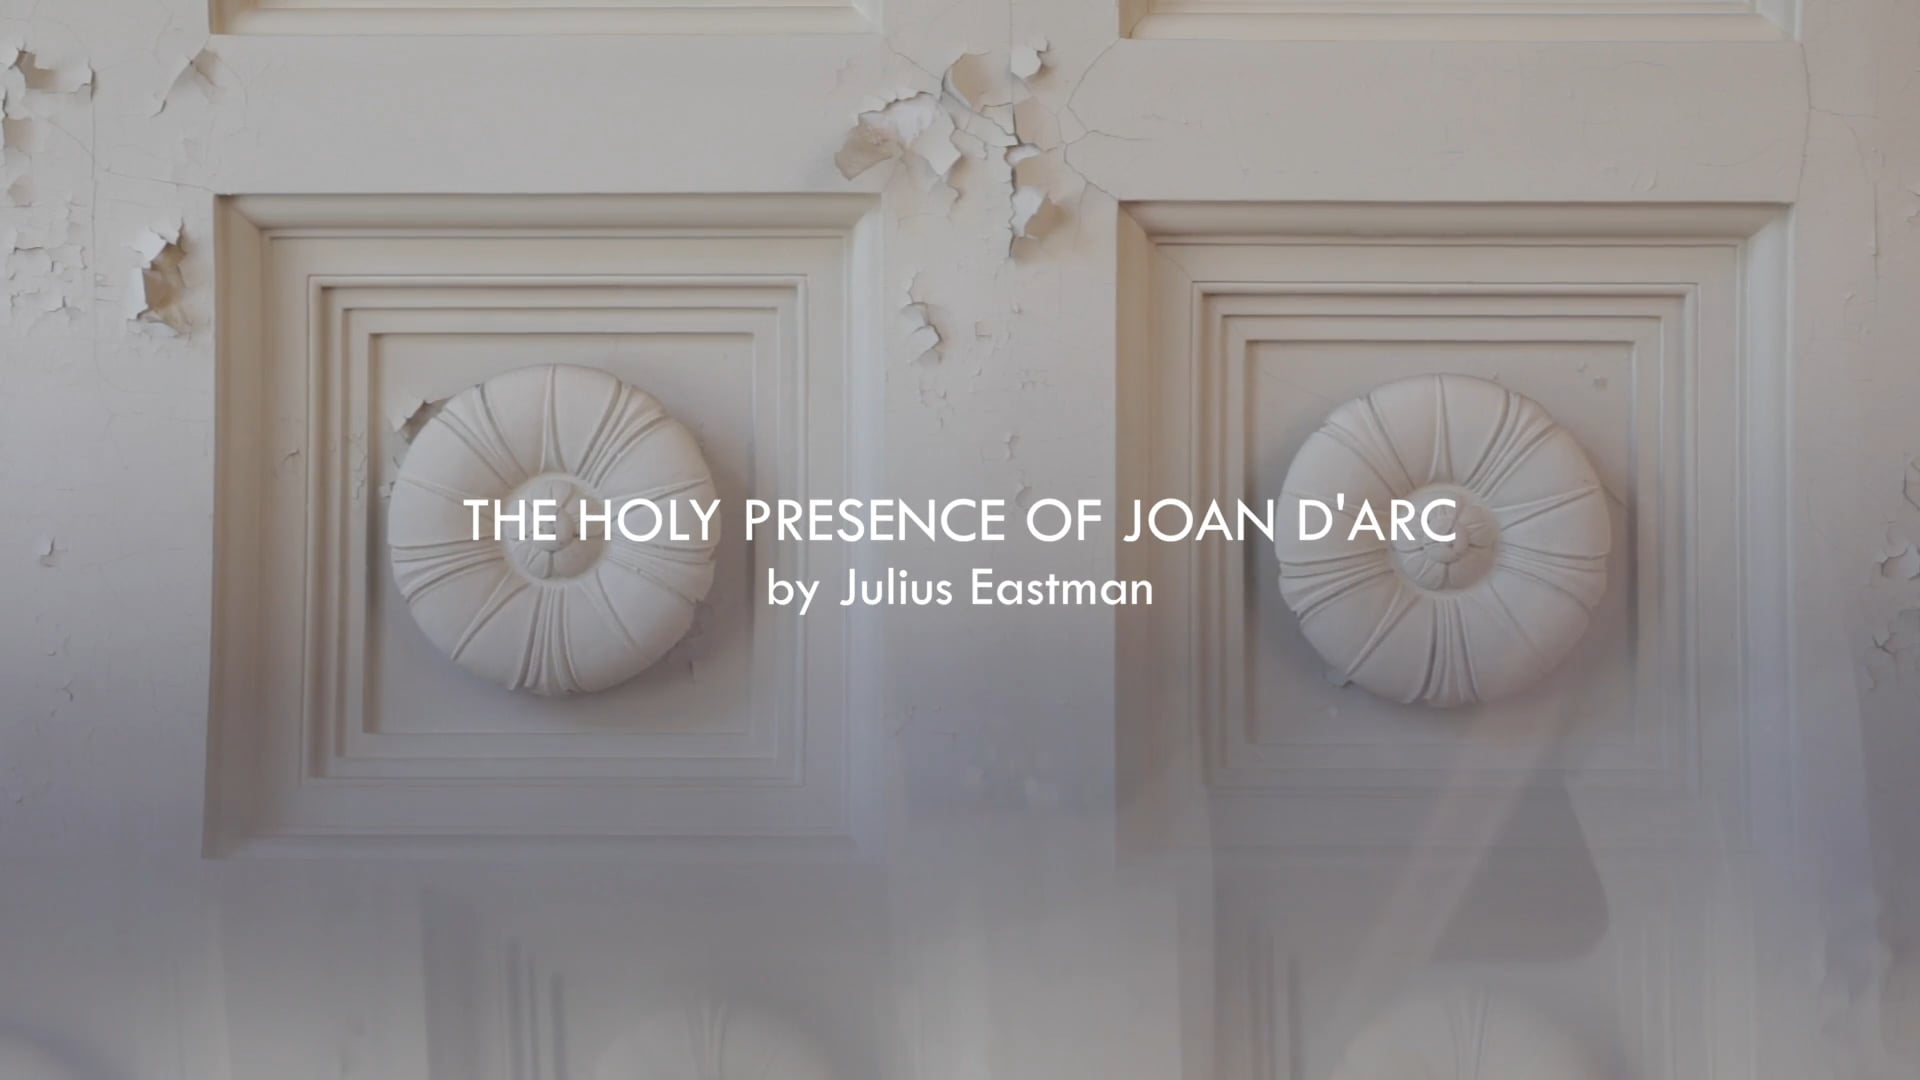 The Bowerbird Cello Ensemble - "The Holy Presence of Joan d'Arc" by Julius Eastman (excerpt)